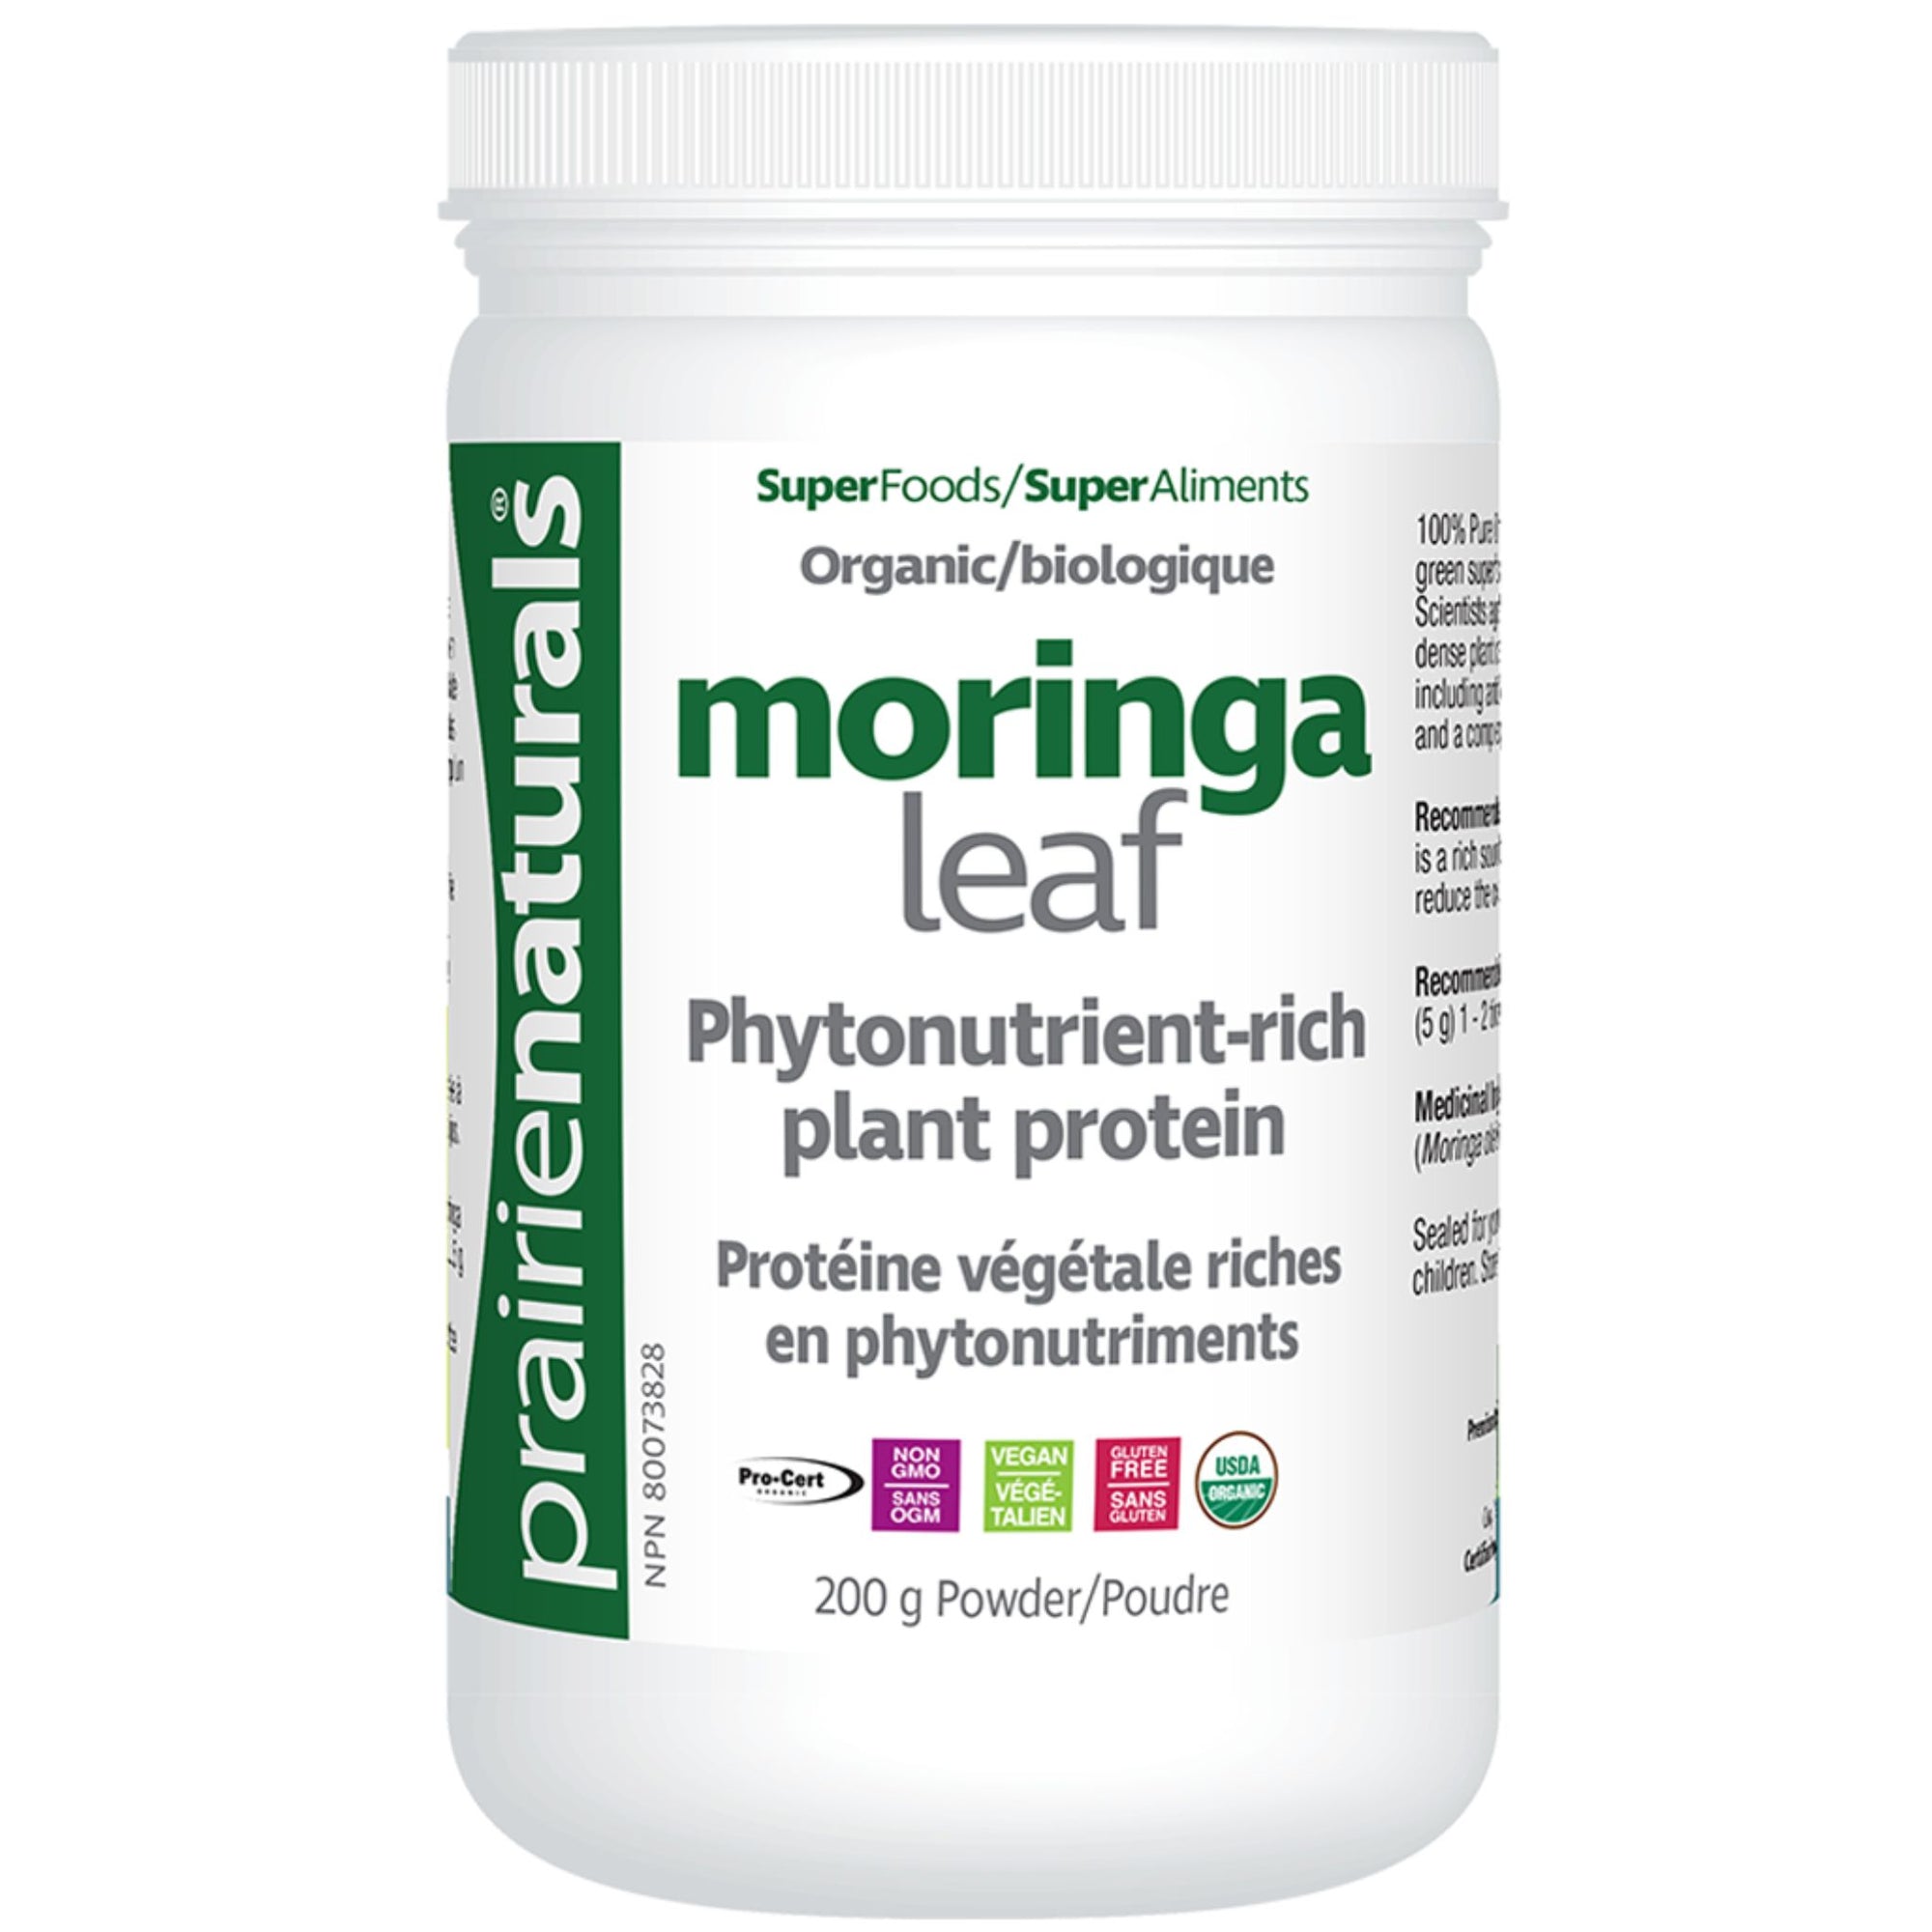 Image of Prairie Naturals Moringa Powder 200g product in a green and white container.